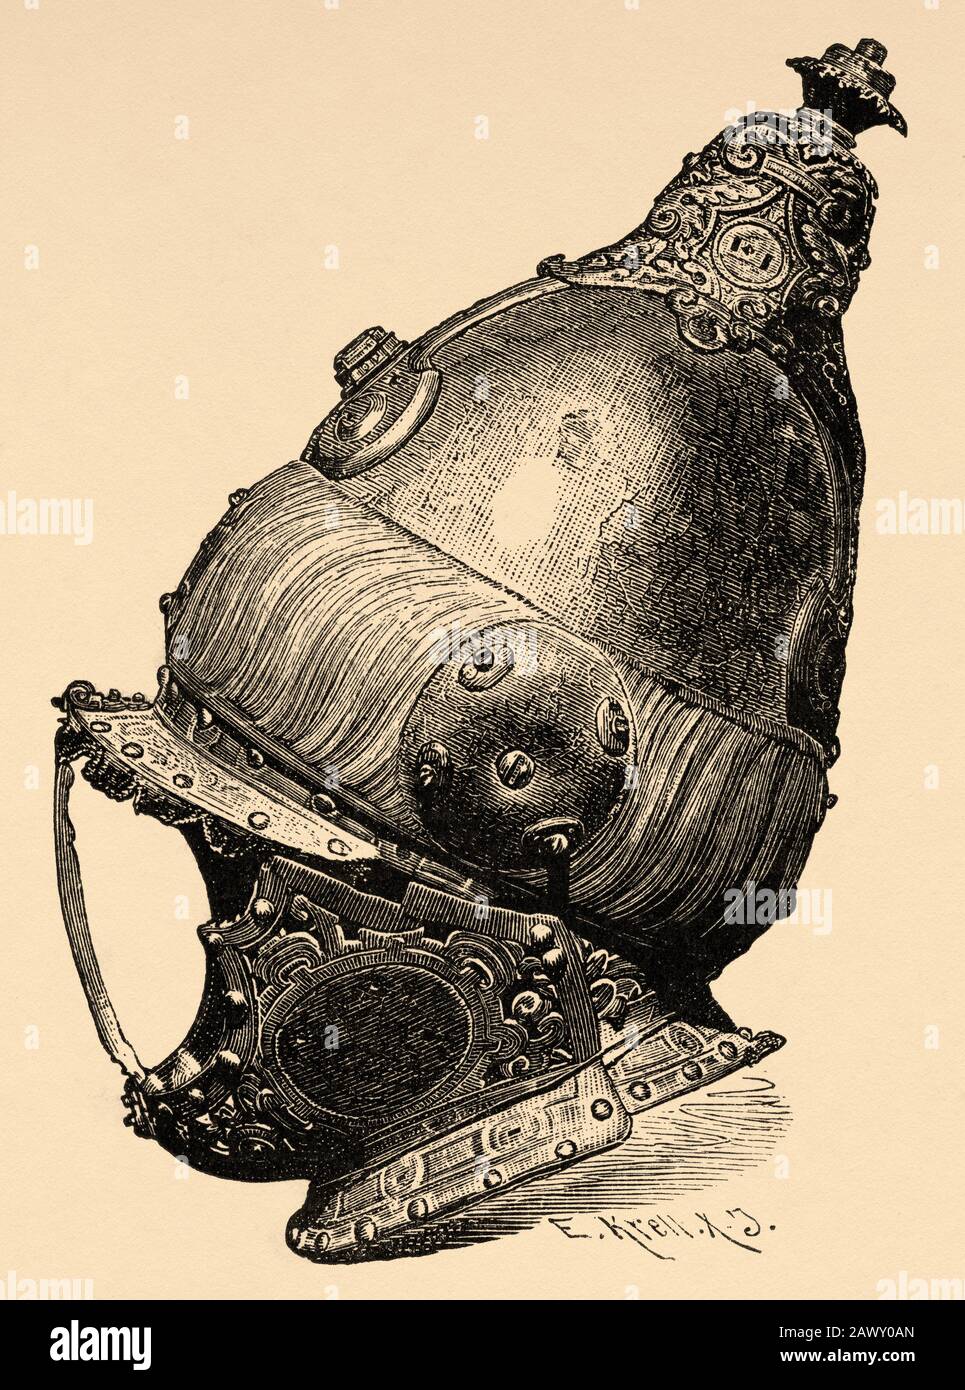 Turkish helmet from the Battle of Lepanto, 16th century. History of Philip II of Spain. Old engraving published in Historia de Felipe II by H. Fornero Stock Photo